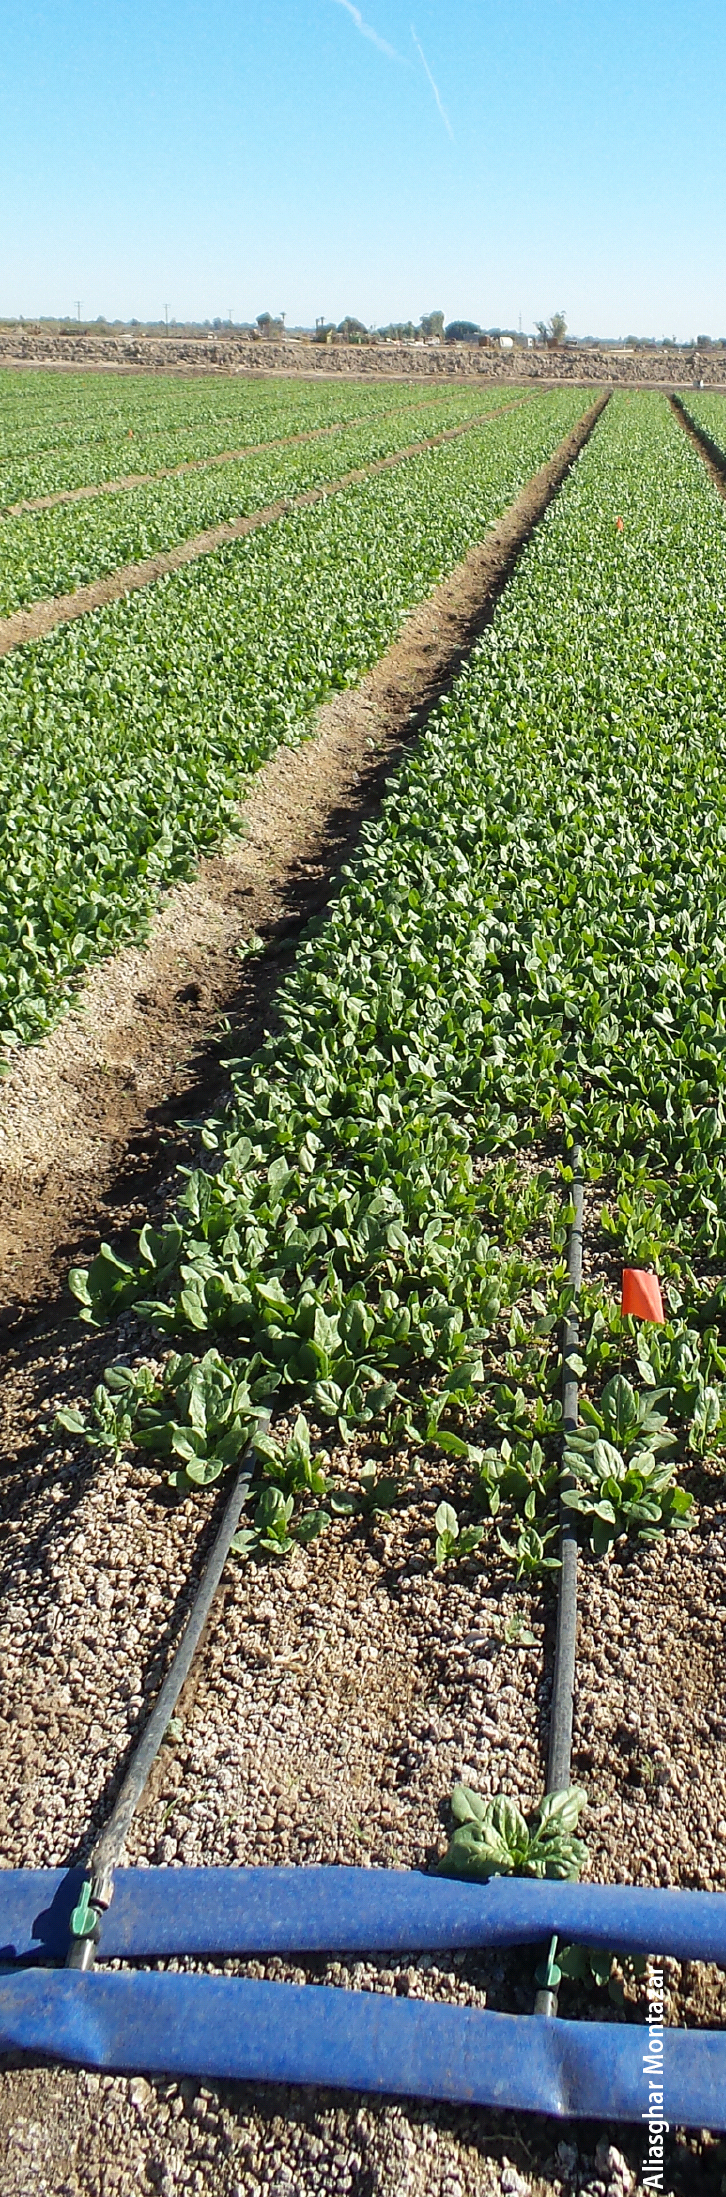 Drip irrigation in organic spinach production shows promise as a means of conserving water and managing disease.